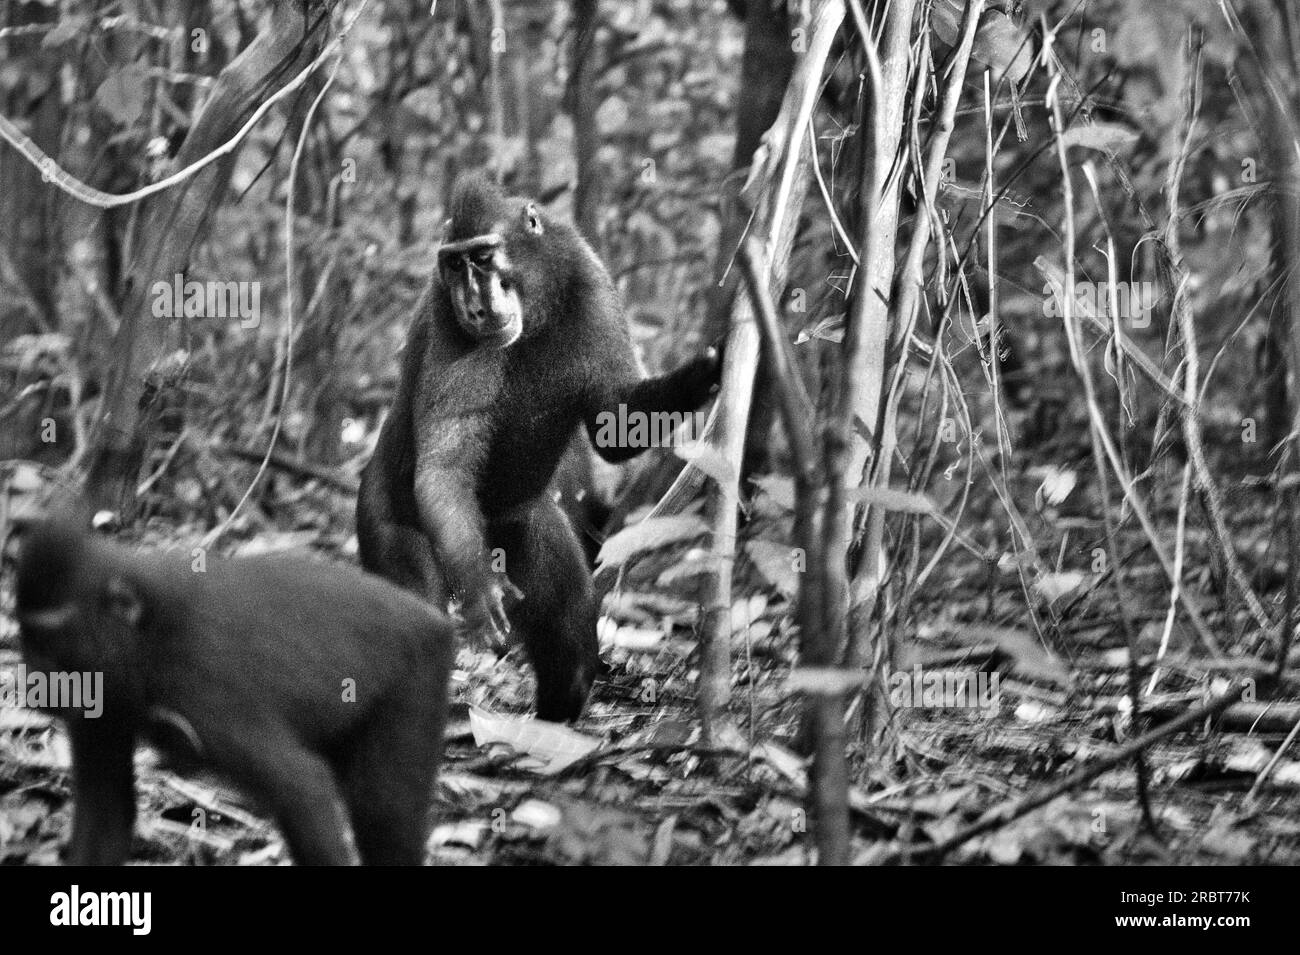 A crested macaque (Macaca nigra) stands bipedally while holding on a tree, as another individual is passing during foraging in Tangkoko Nature Reserve, North Sulawesi, Indonesia. Climate change and disease are emerging threats to primates, and approximately one-quarter of primates’ ranges have temperatures over historical ones, wrote a team of scientists led by Miriam Plaza Pinto (Universidade Federal do Rio Grande do Norte, Natal, RN, Brazil) in their scientific report published on Nature. Without climate change factor, Macaca nigra is still one of the 25 most endangered primates on earth. Stock Photo